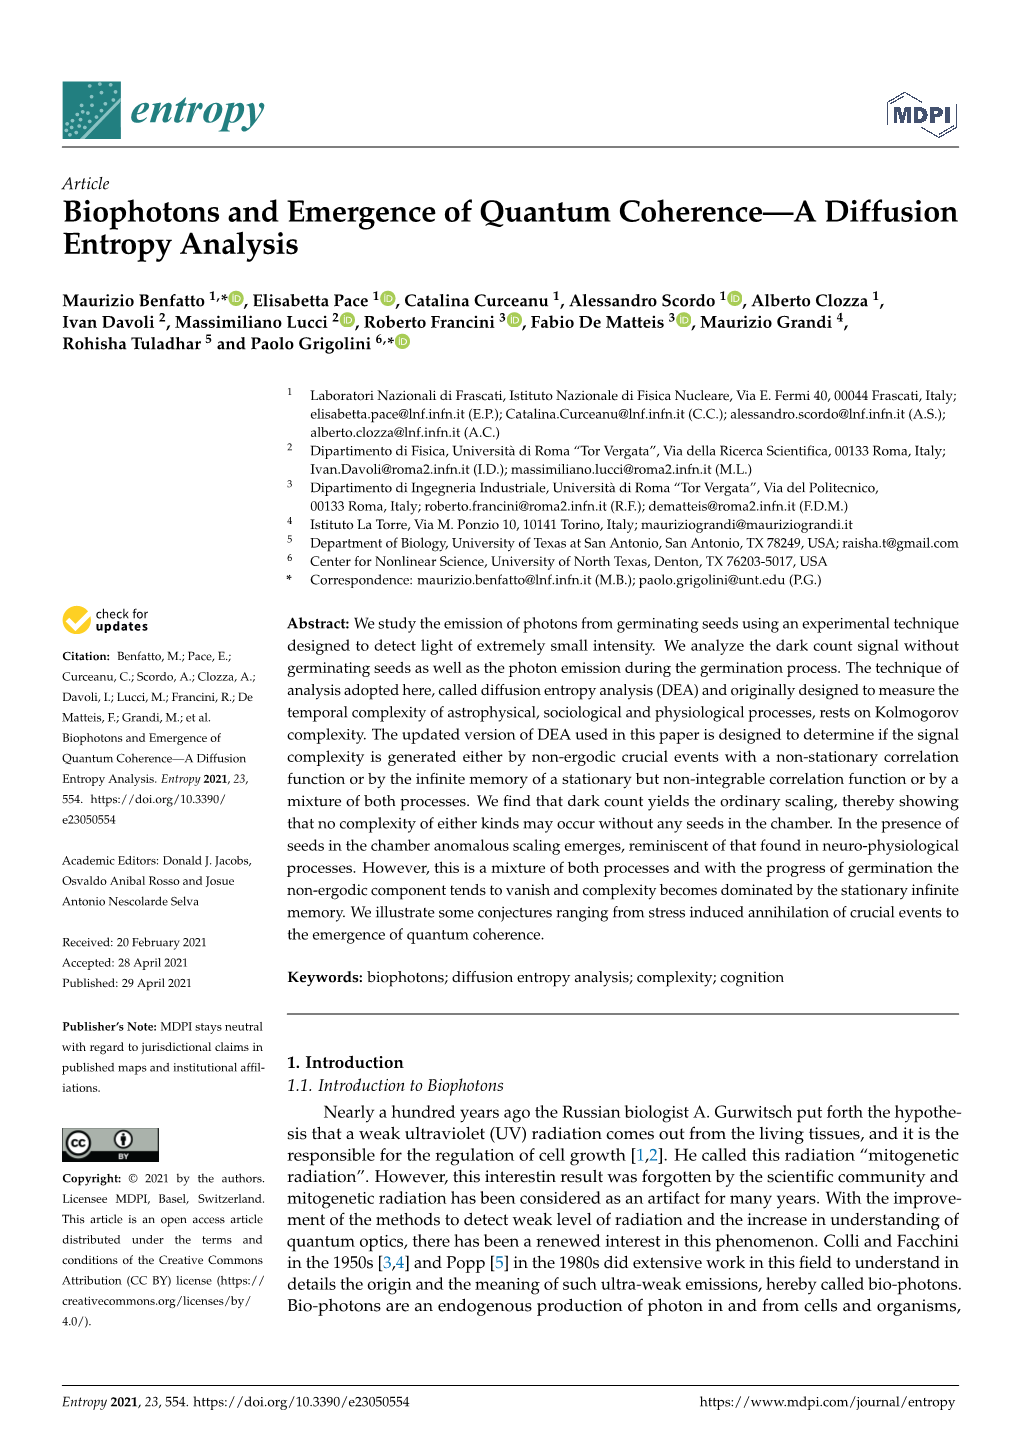 Biophotons and Emergence of Quantum Coherence—A Diffusion Entropy Analysis